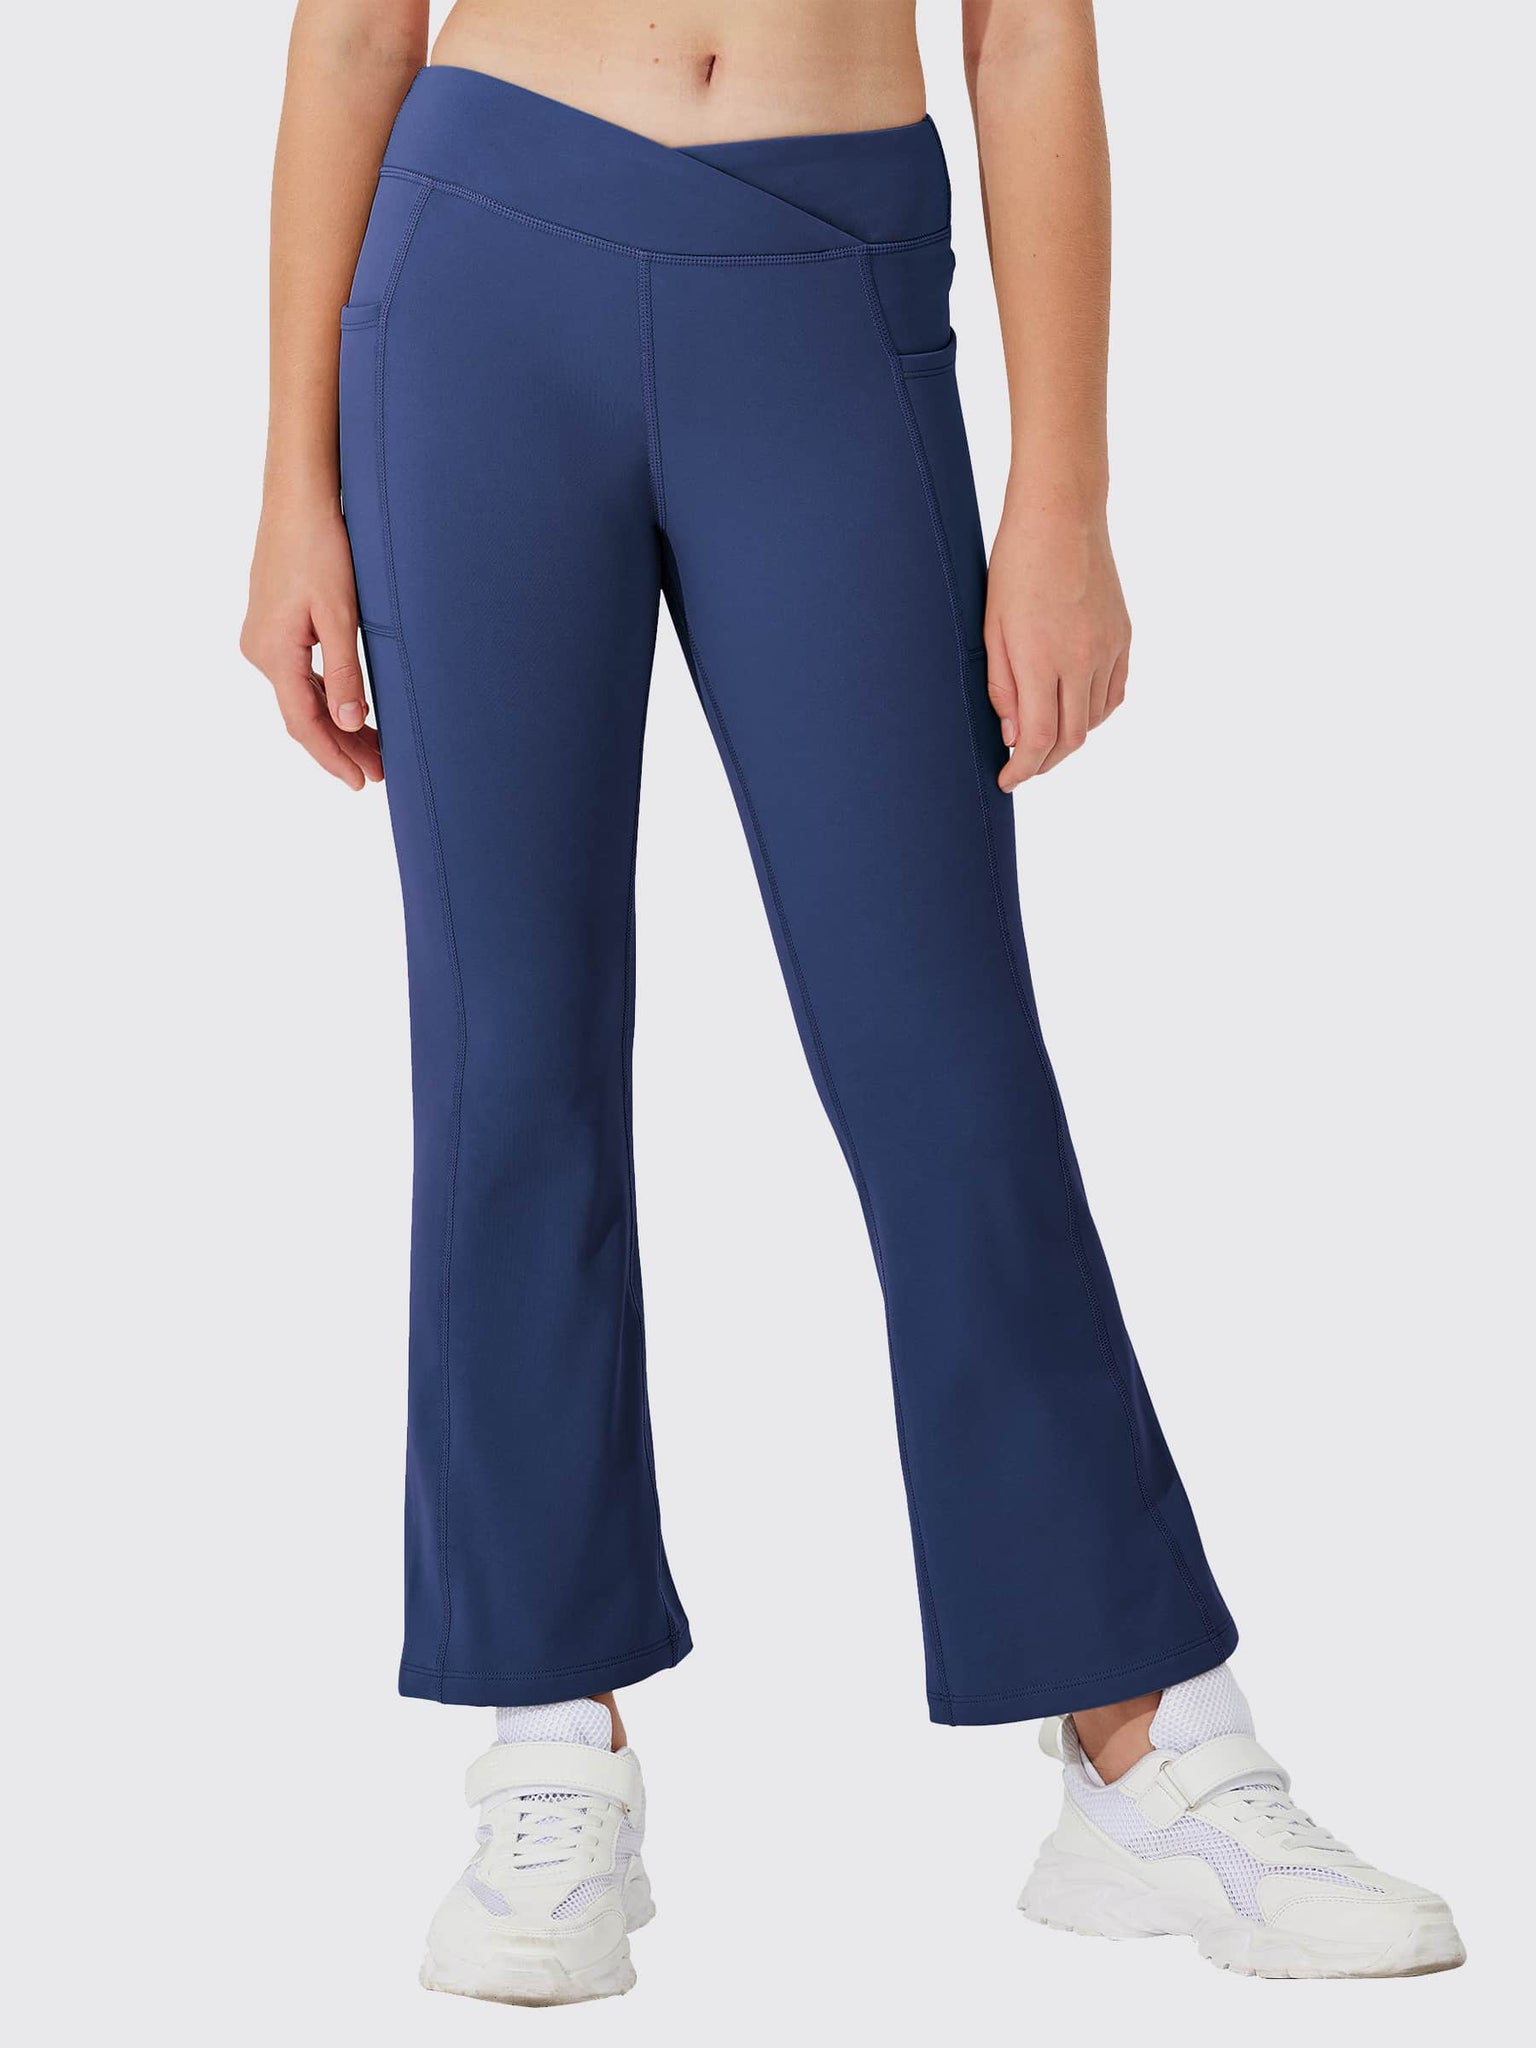 Laureate Fleece Lined Crossover Flared Pants